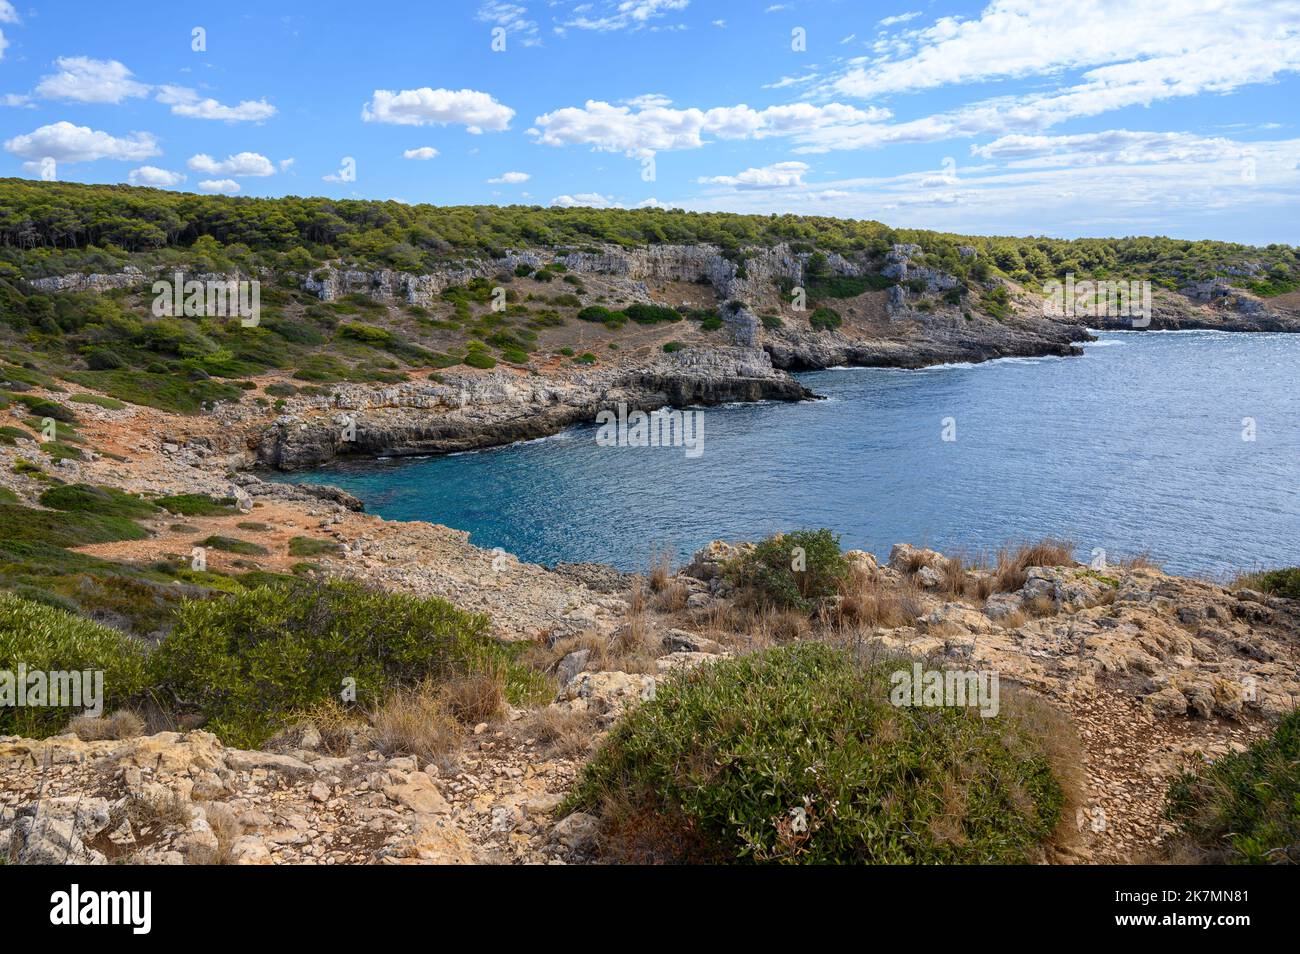 View to the Regional Natural Park of Porto Selvaggio with its rugged coastline and pine woods, Apulia (Puglia), Italy. Stock Photo